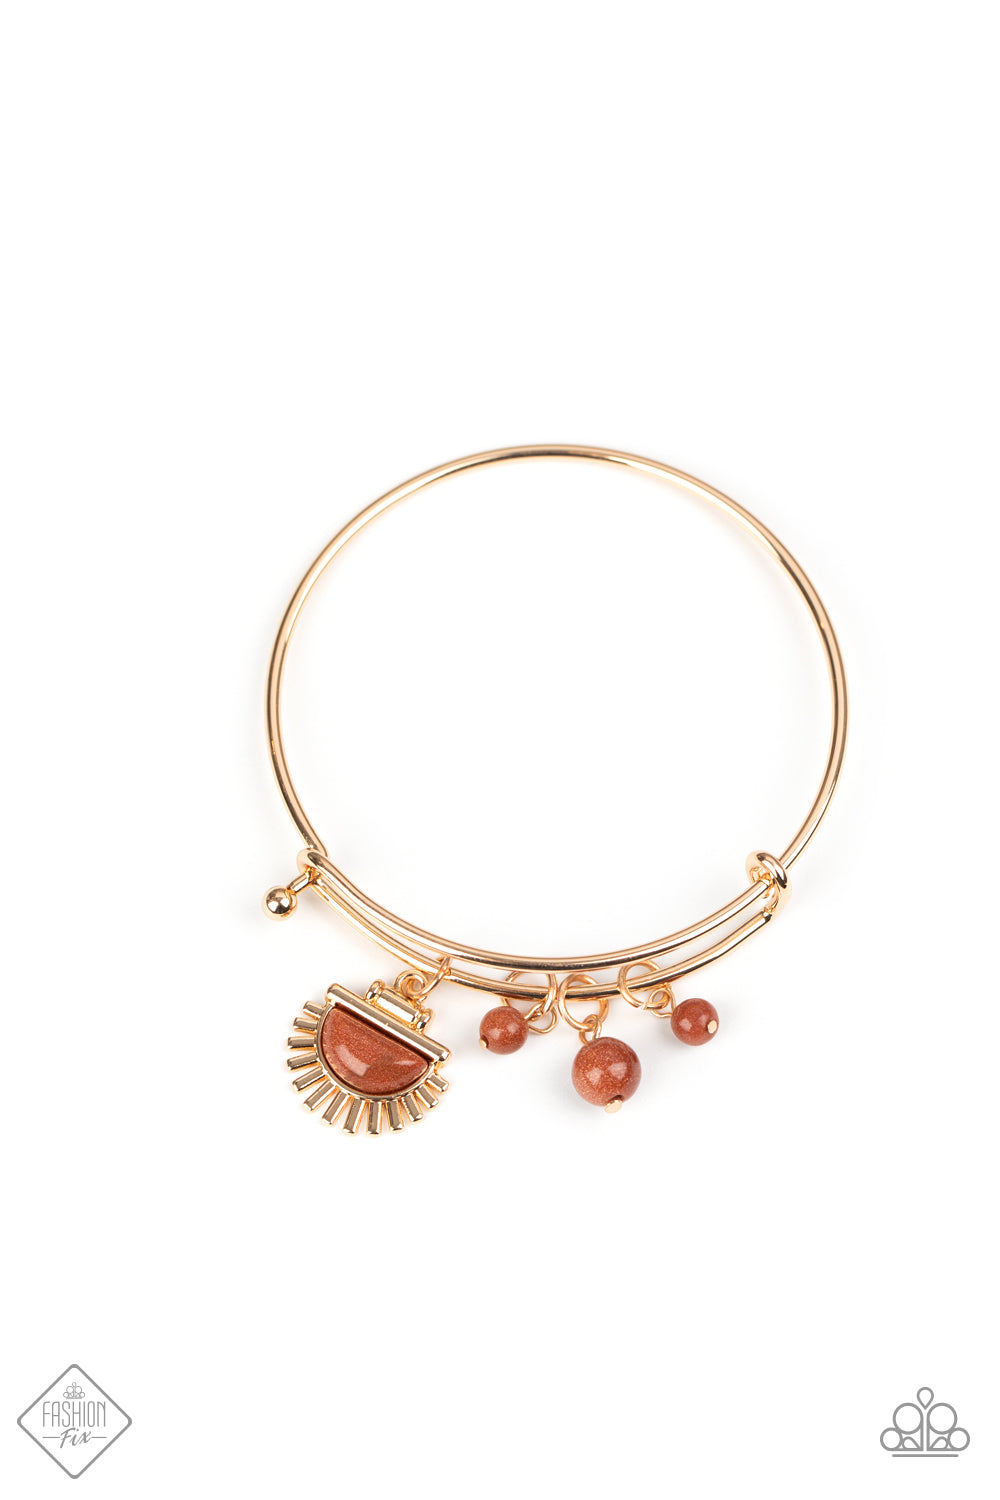 Mind, Body, and SOL Gold Charm Bracelet - Paparazzi Accessories